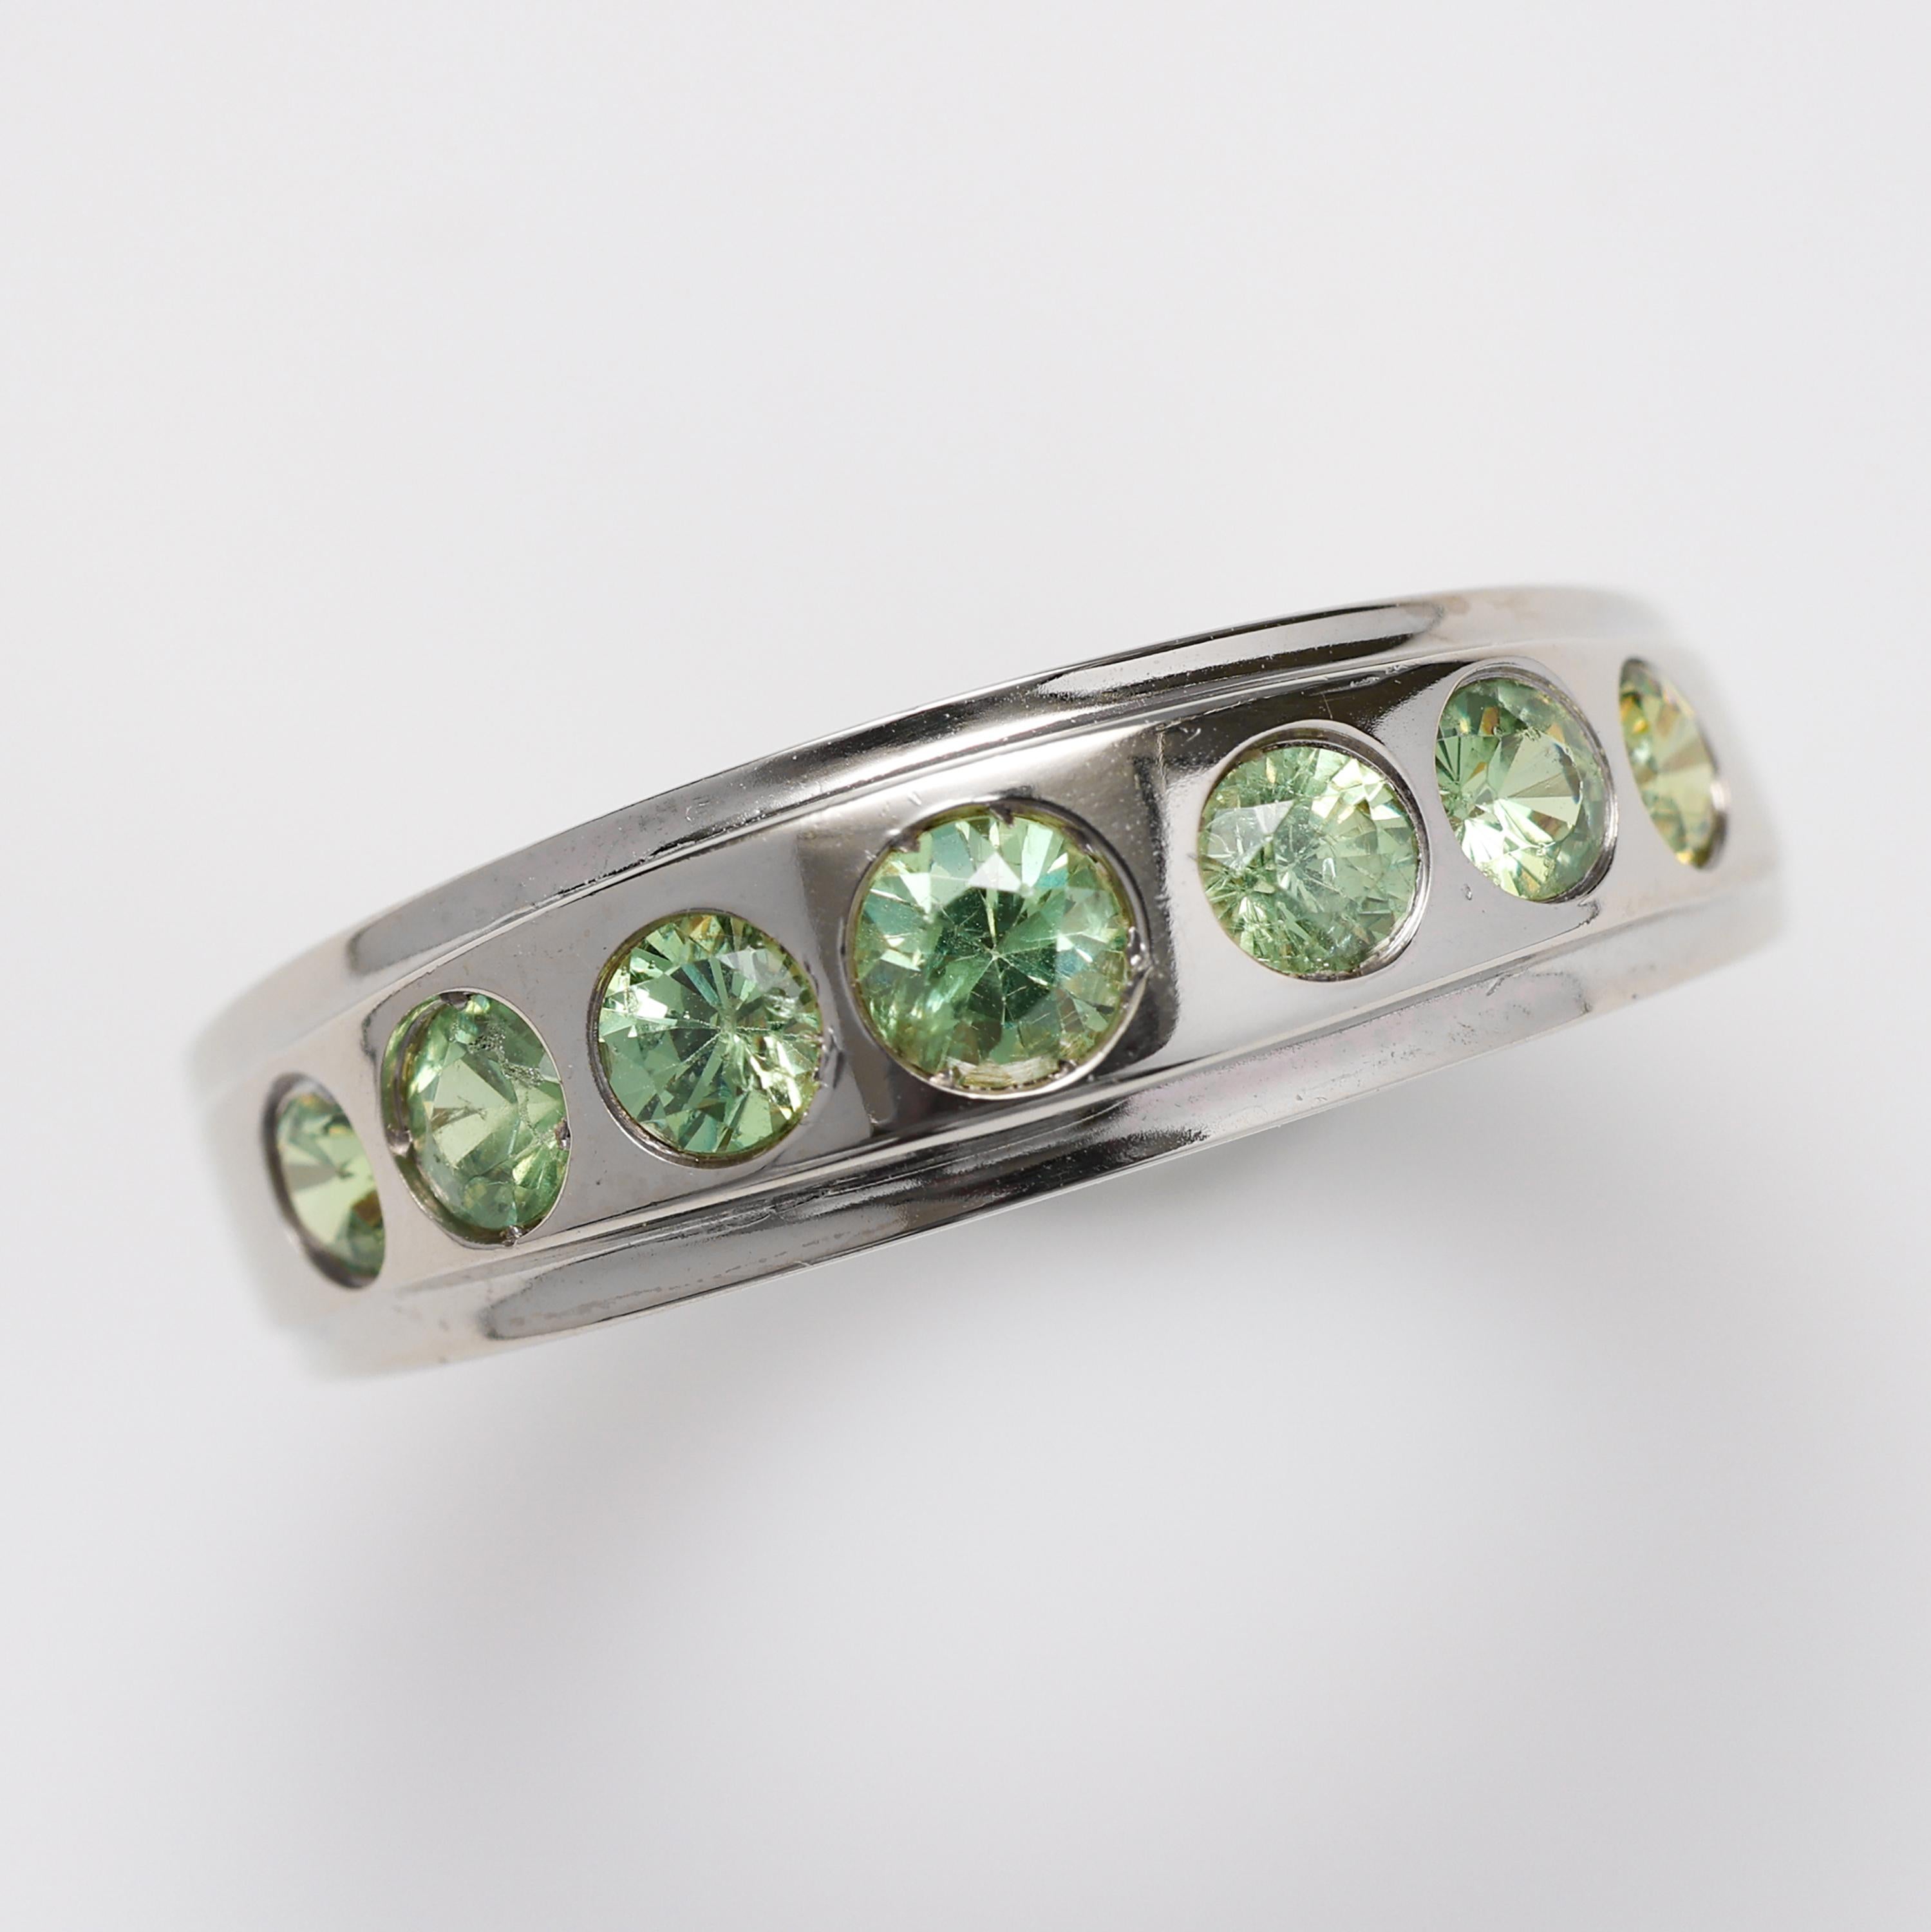 This sleek unisex 18K white gold ring features seven bright green demantoid garnets and would make the perfect wedding band or stack ring. Created by hand most likely in the late 1980s or early 1990s, this timeless classic is endlessly captivating